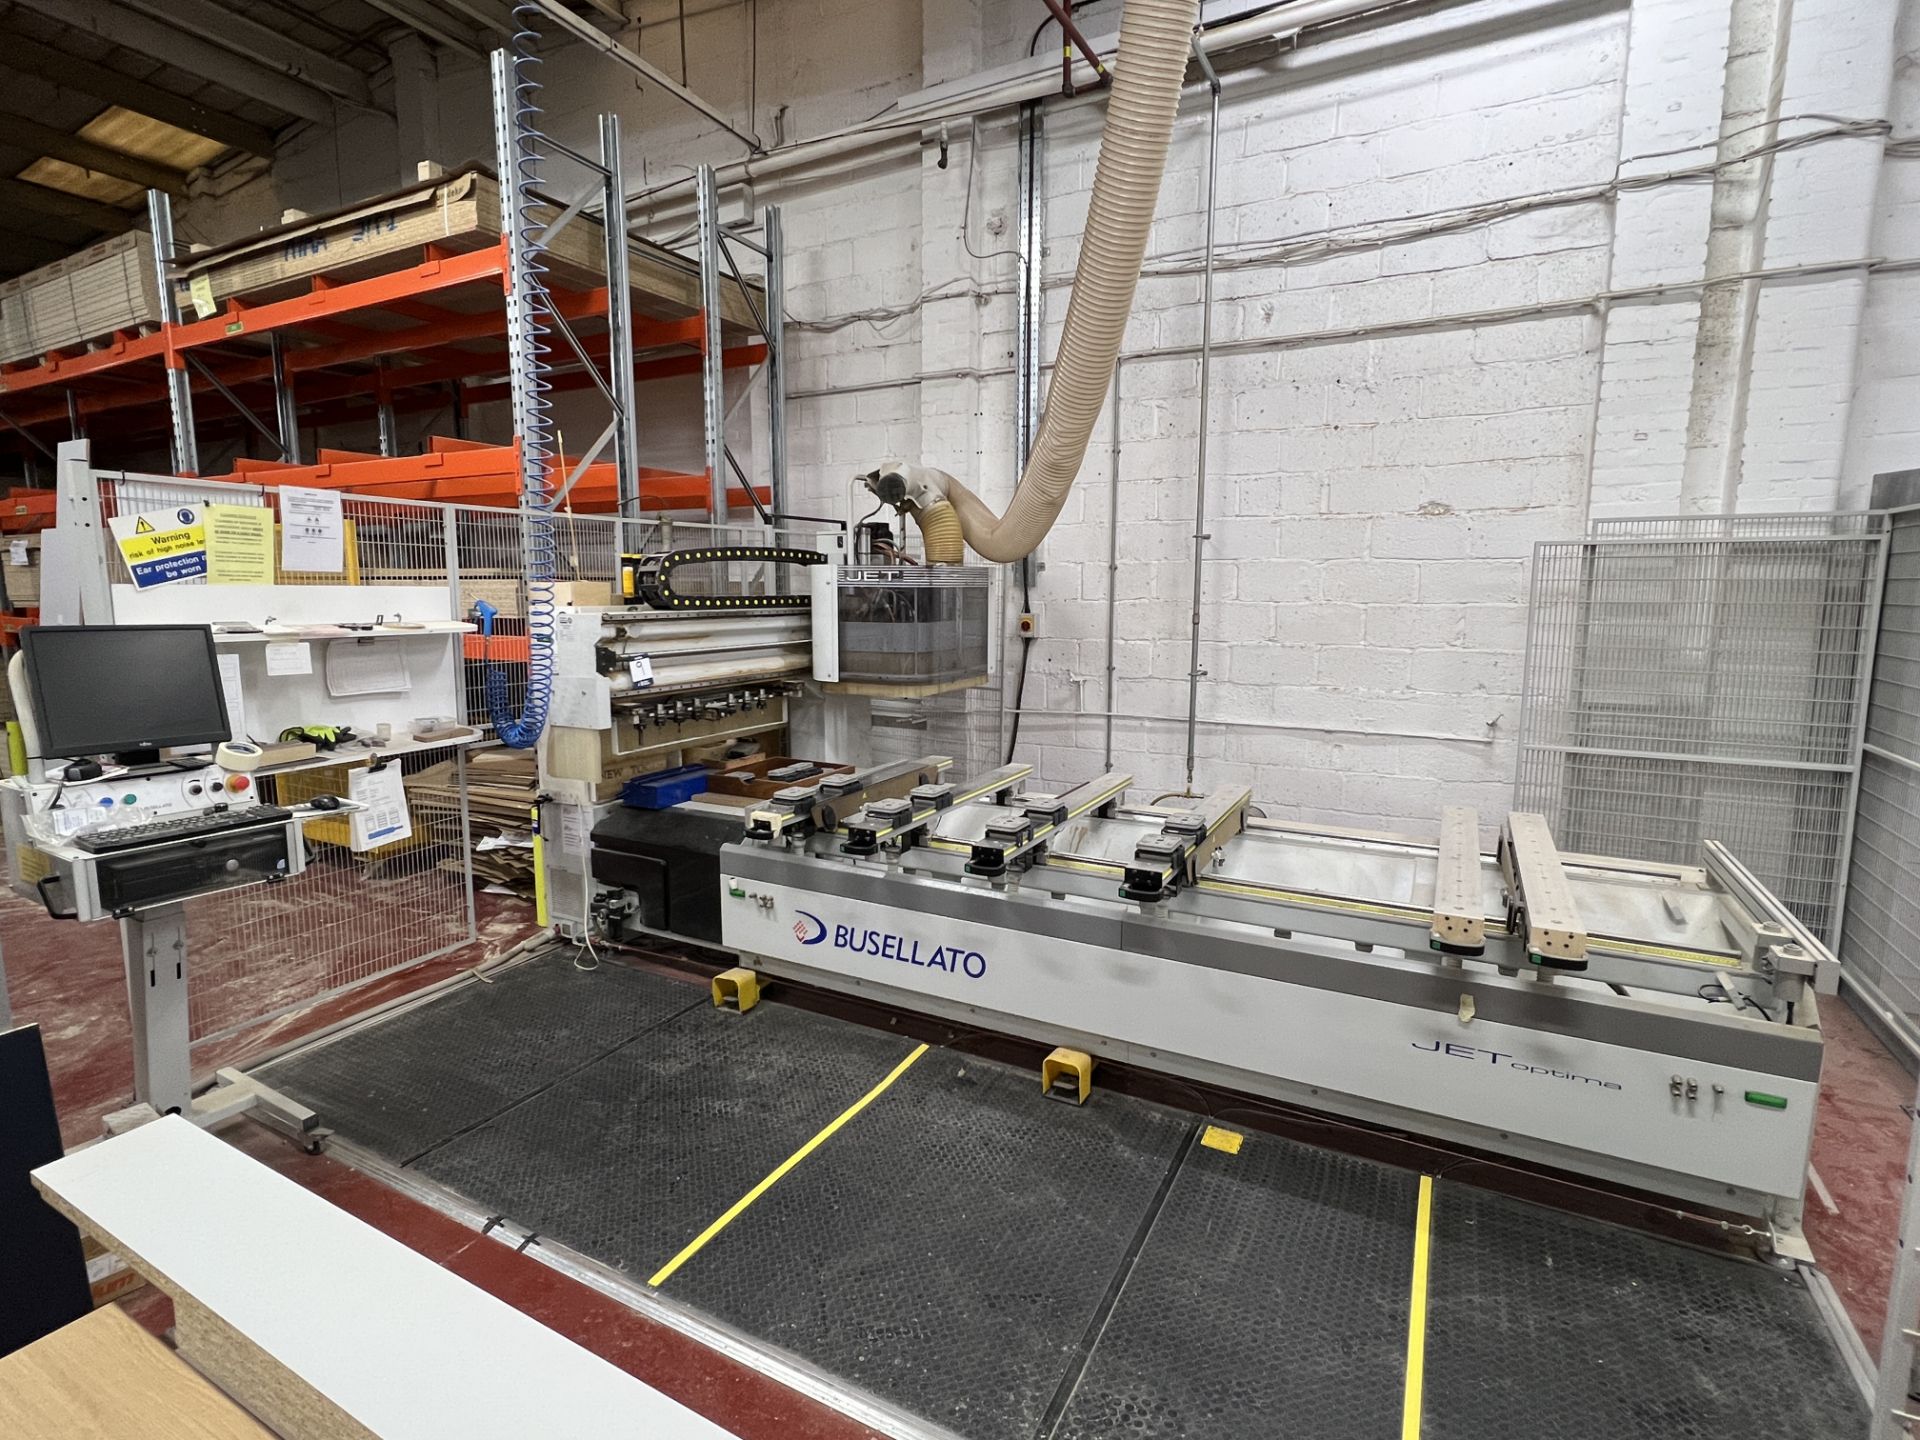 Busellato Jet Optima C1 machining centre fitted with Router head, 8 - position tool changer,